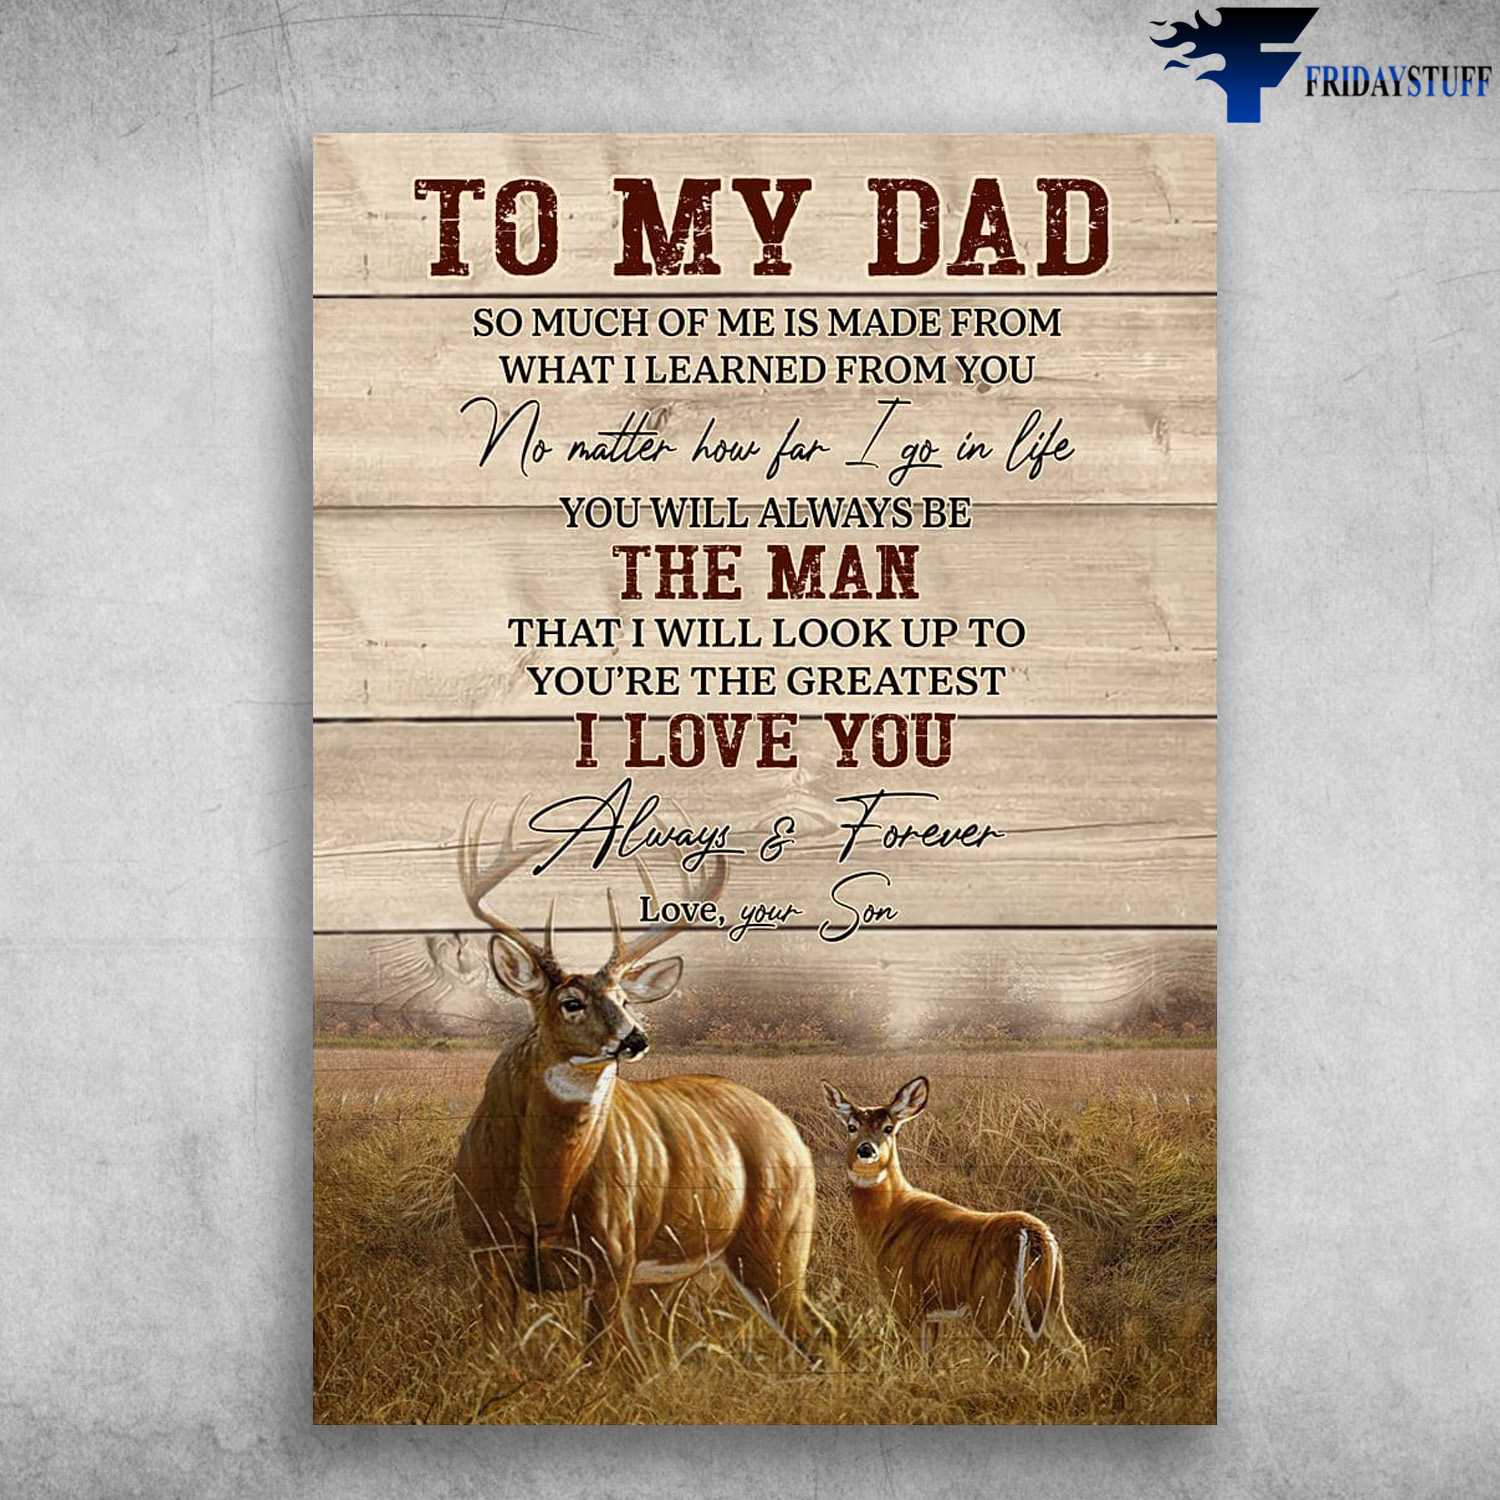 Dad And Son, Gift For Dad, To My Dad, So Much Of Me, Is Made From What I Learned From You, No Matter How Far I Go In Life, You Will Always Be The Man, That I Will Look Up To